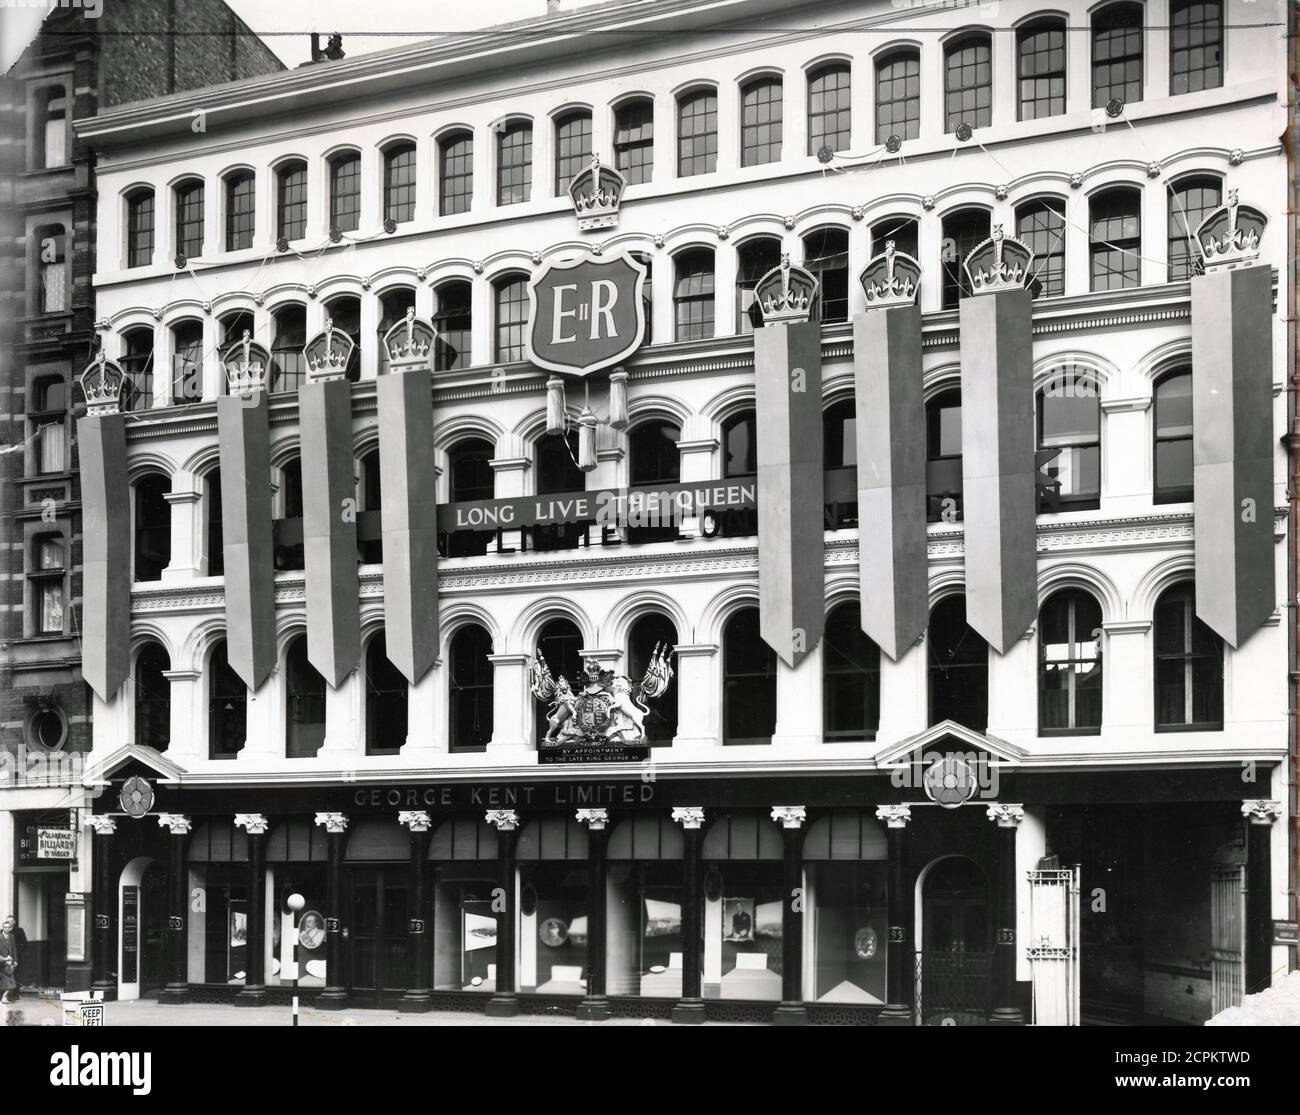 George Kent Ltd of High Holborn (1953) taken from an original photograph by D Griffin for the London photographers Larkin Brothers. Coincidentally it also shows the entrance to Larkins offices at the bottom left of the photo (201 High Holborn) Stock Photo